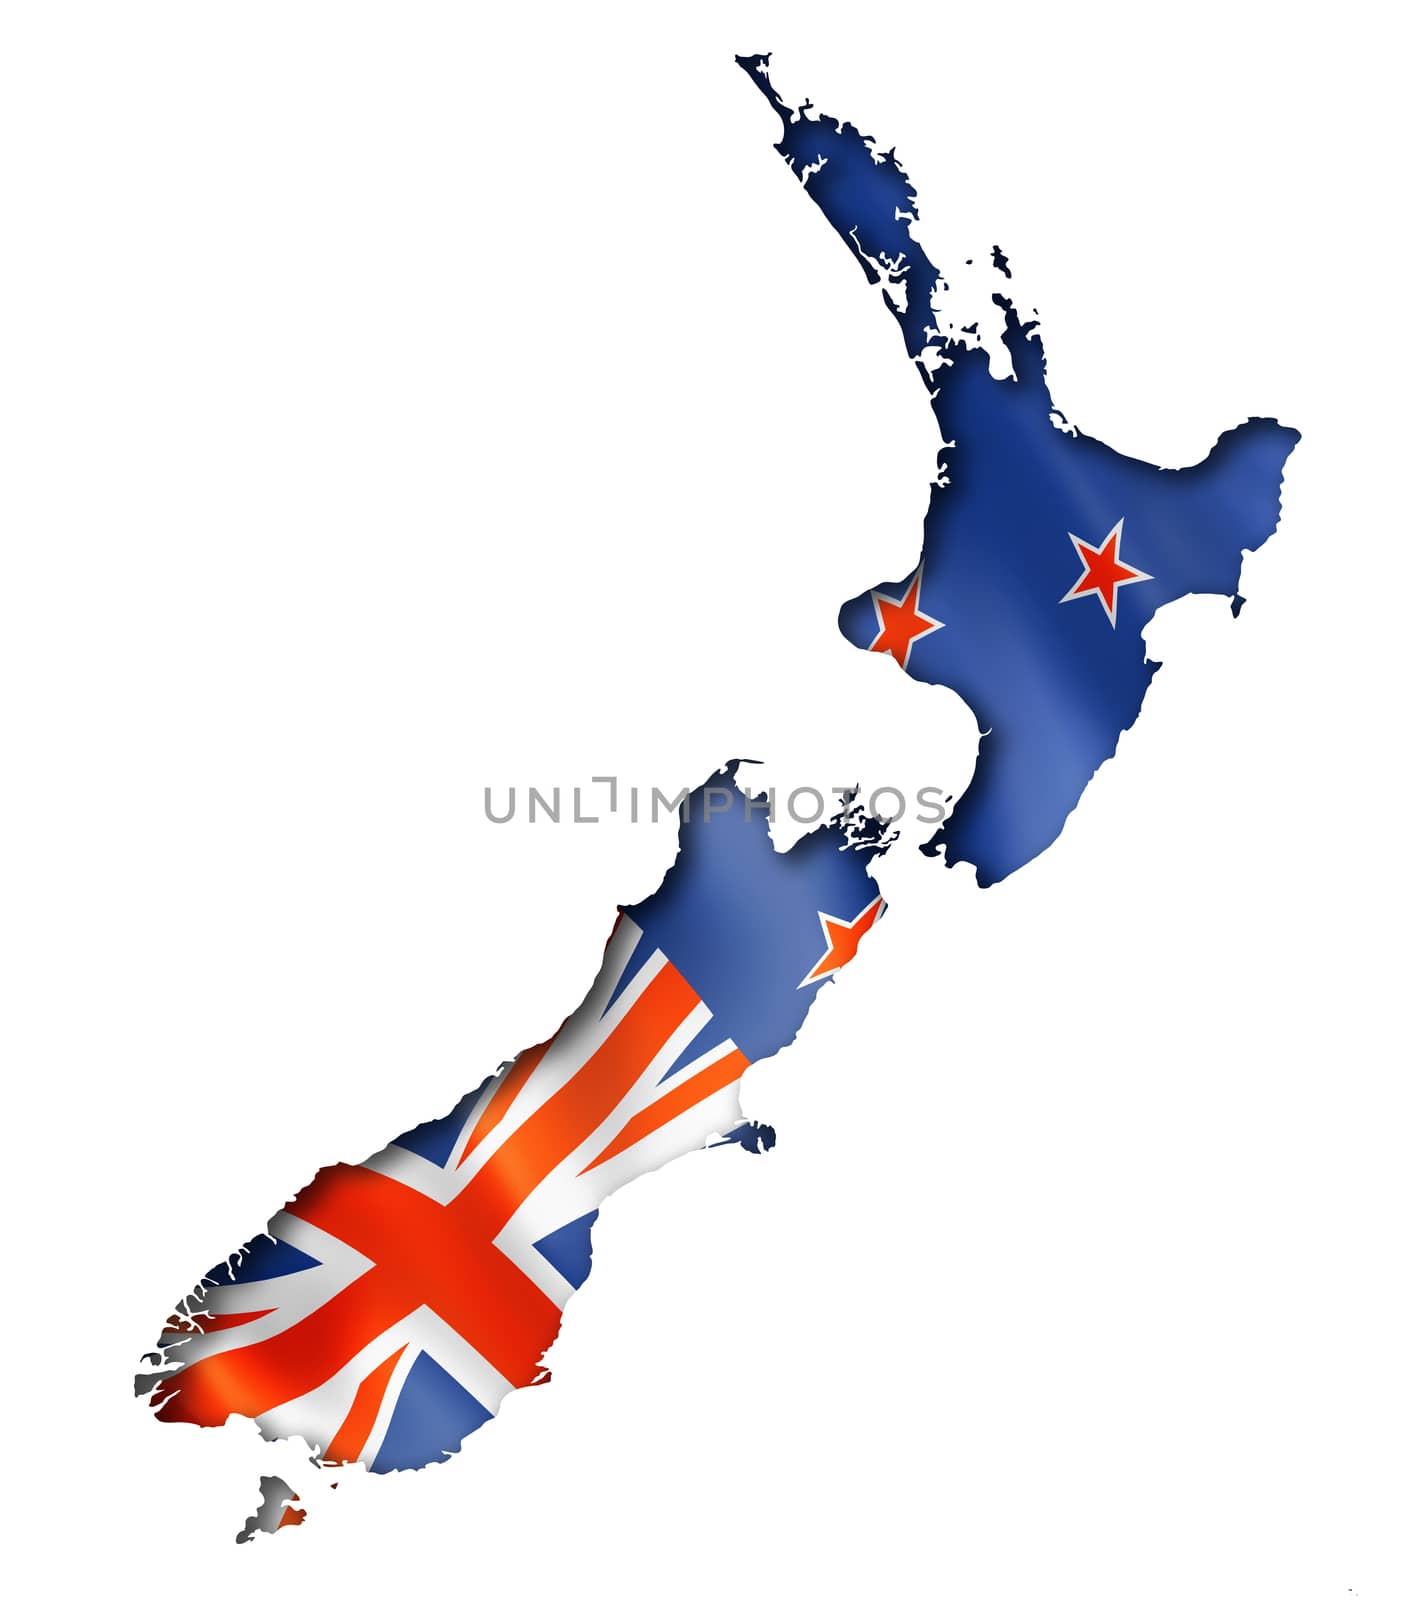 New Zealand flag map, three dimensional render, isolated on white